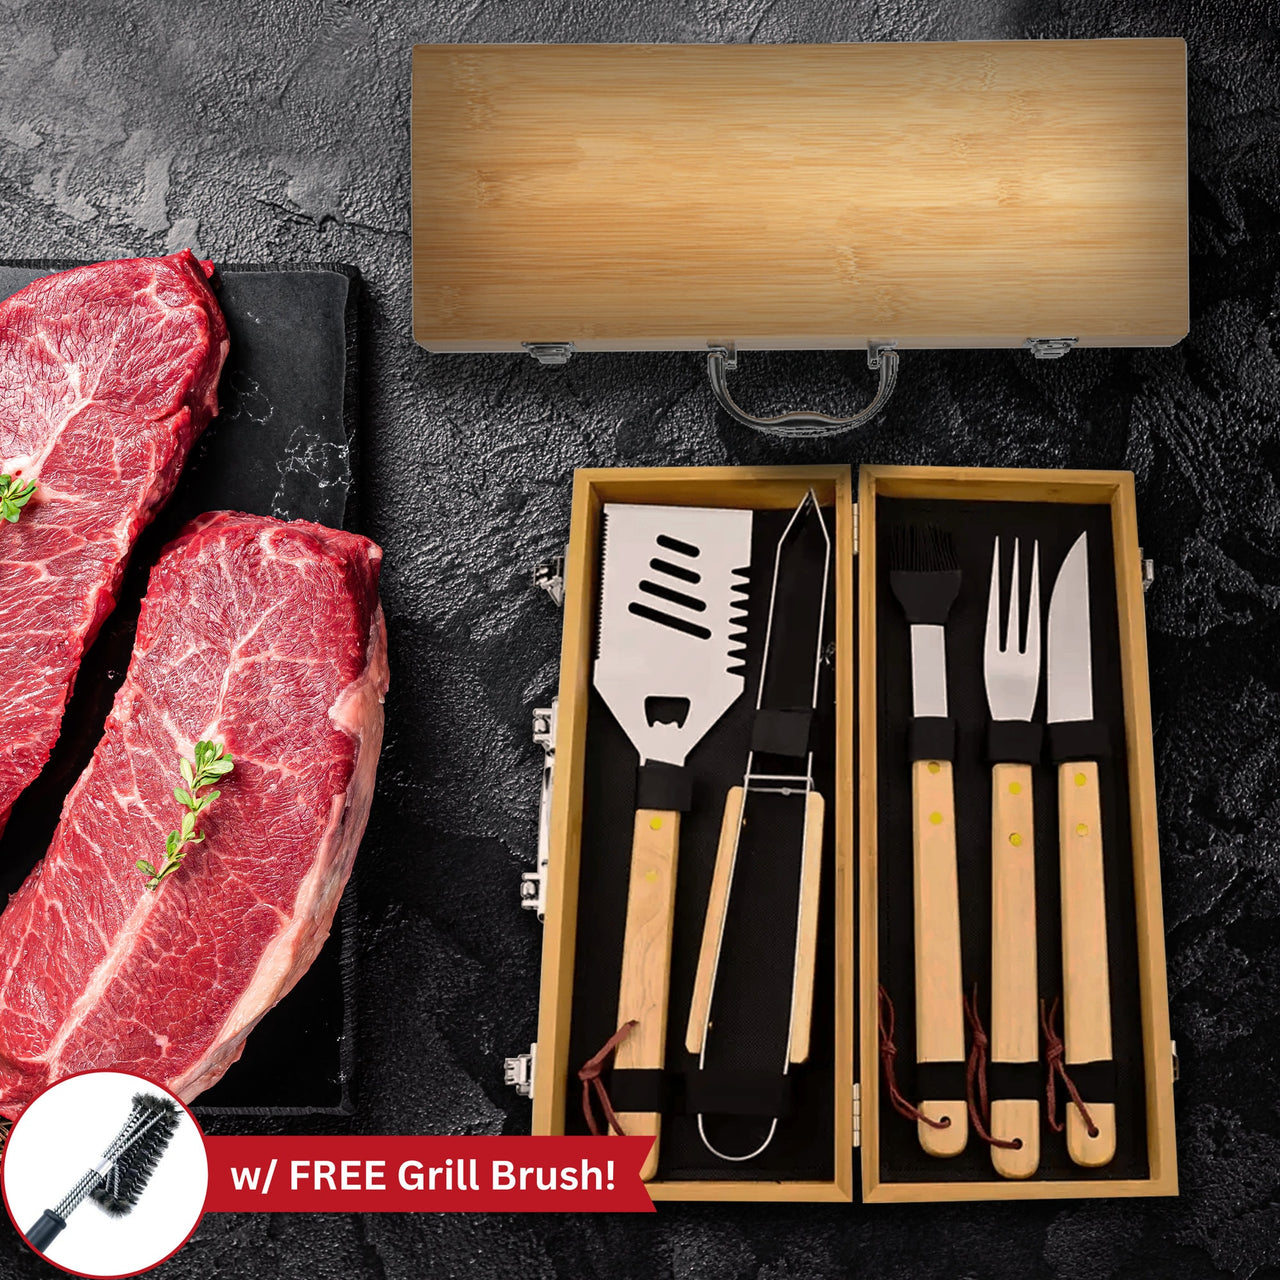 Daddy's Grill Gift - Personalized Grill Set for Dad, Custom Grilling Tool Set